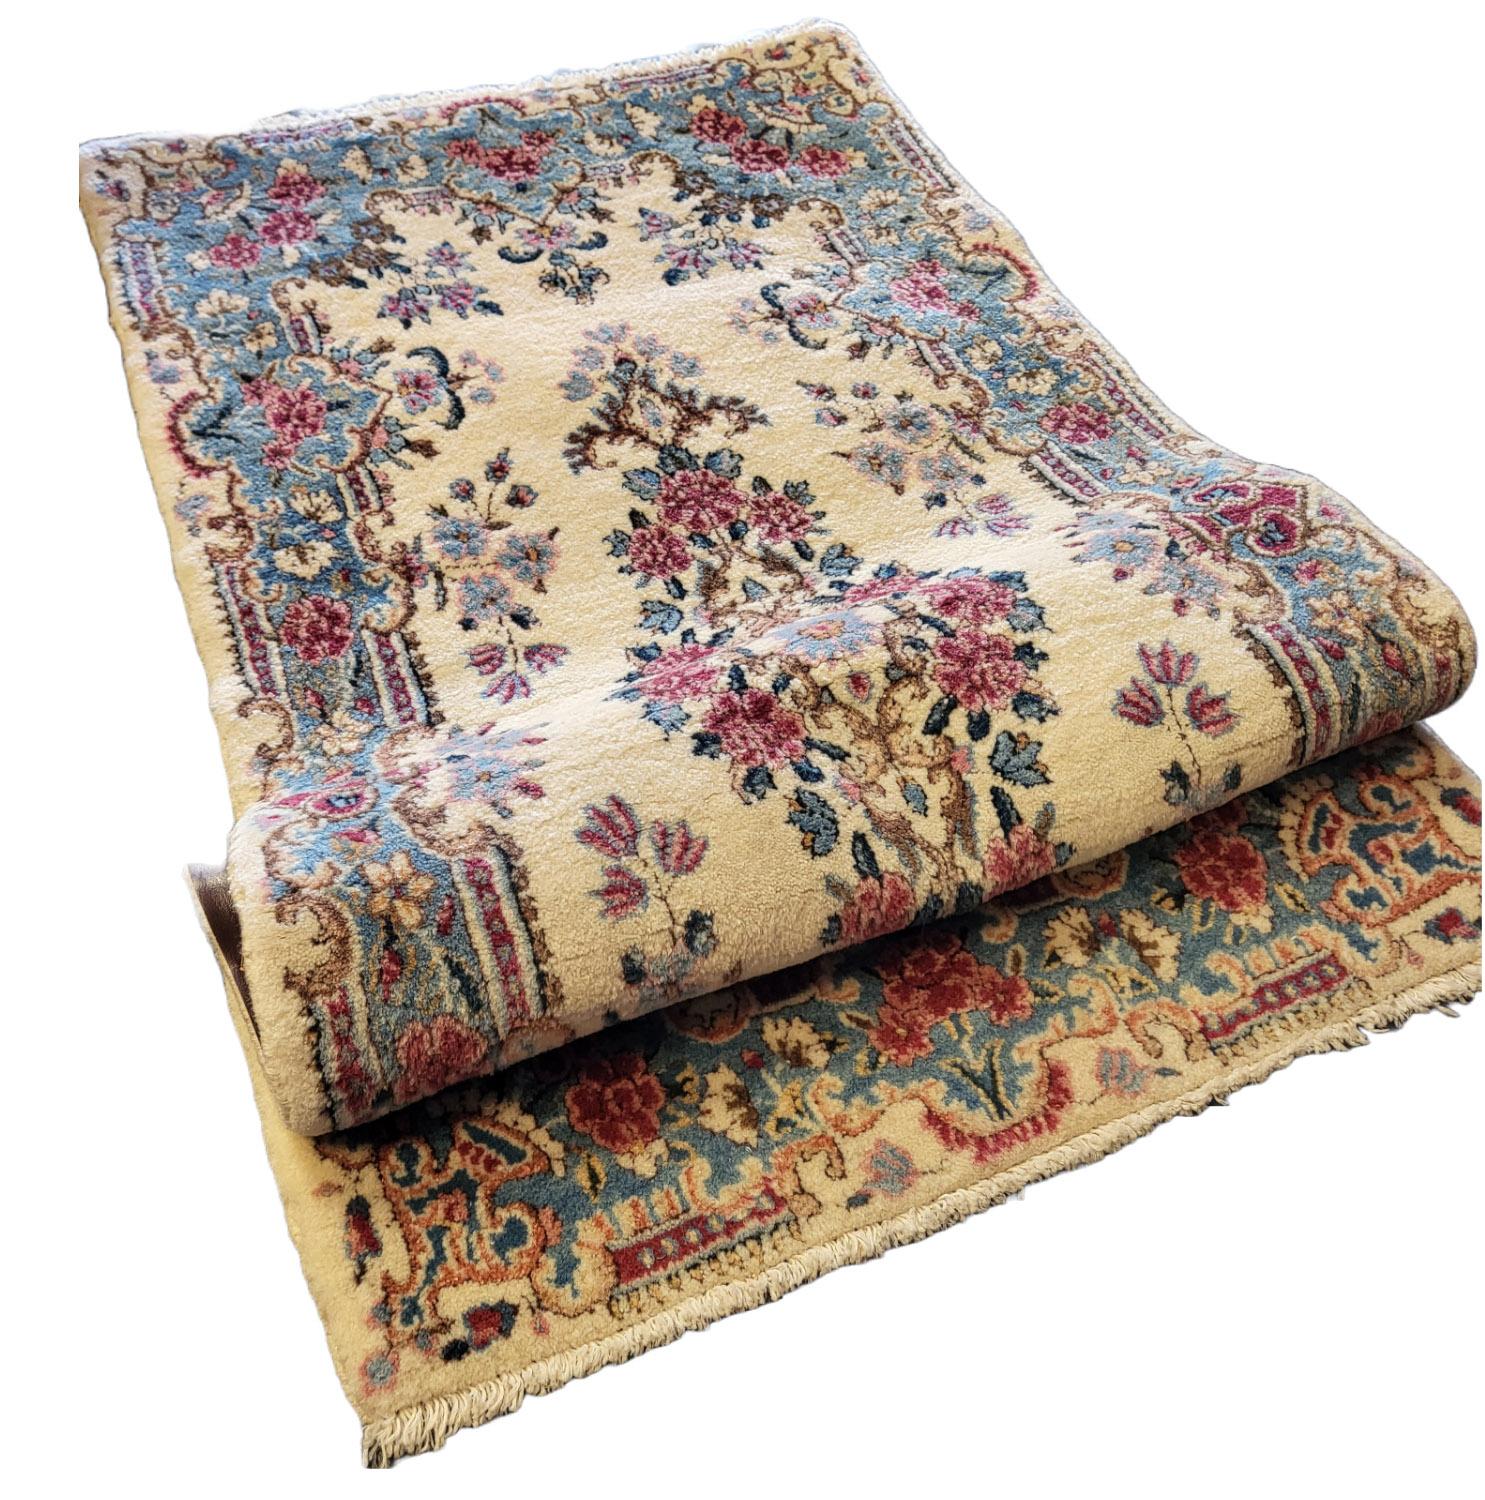 Gorgeous authentic, antique Kirman:

Made of finely woven Persian wool, resulting in an incredibly plush and soft pile.

Beautiful design with an excellent soft color pallet.

This antique is in superb condition, a reflection of it's excellent